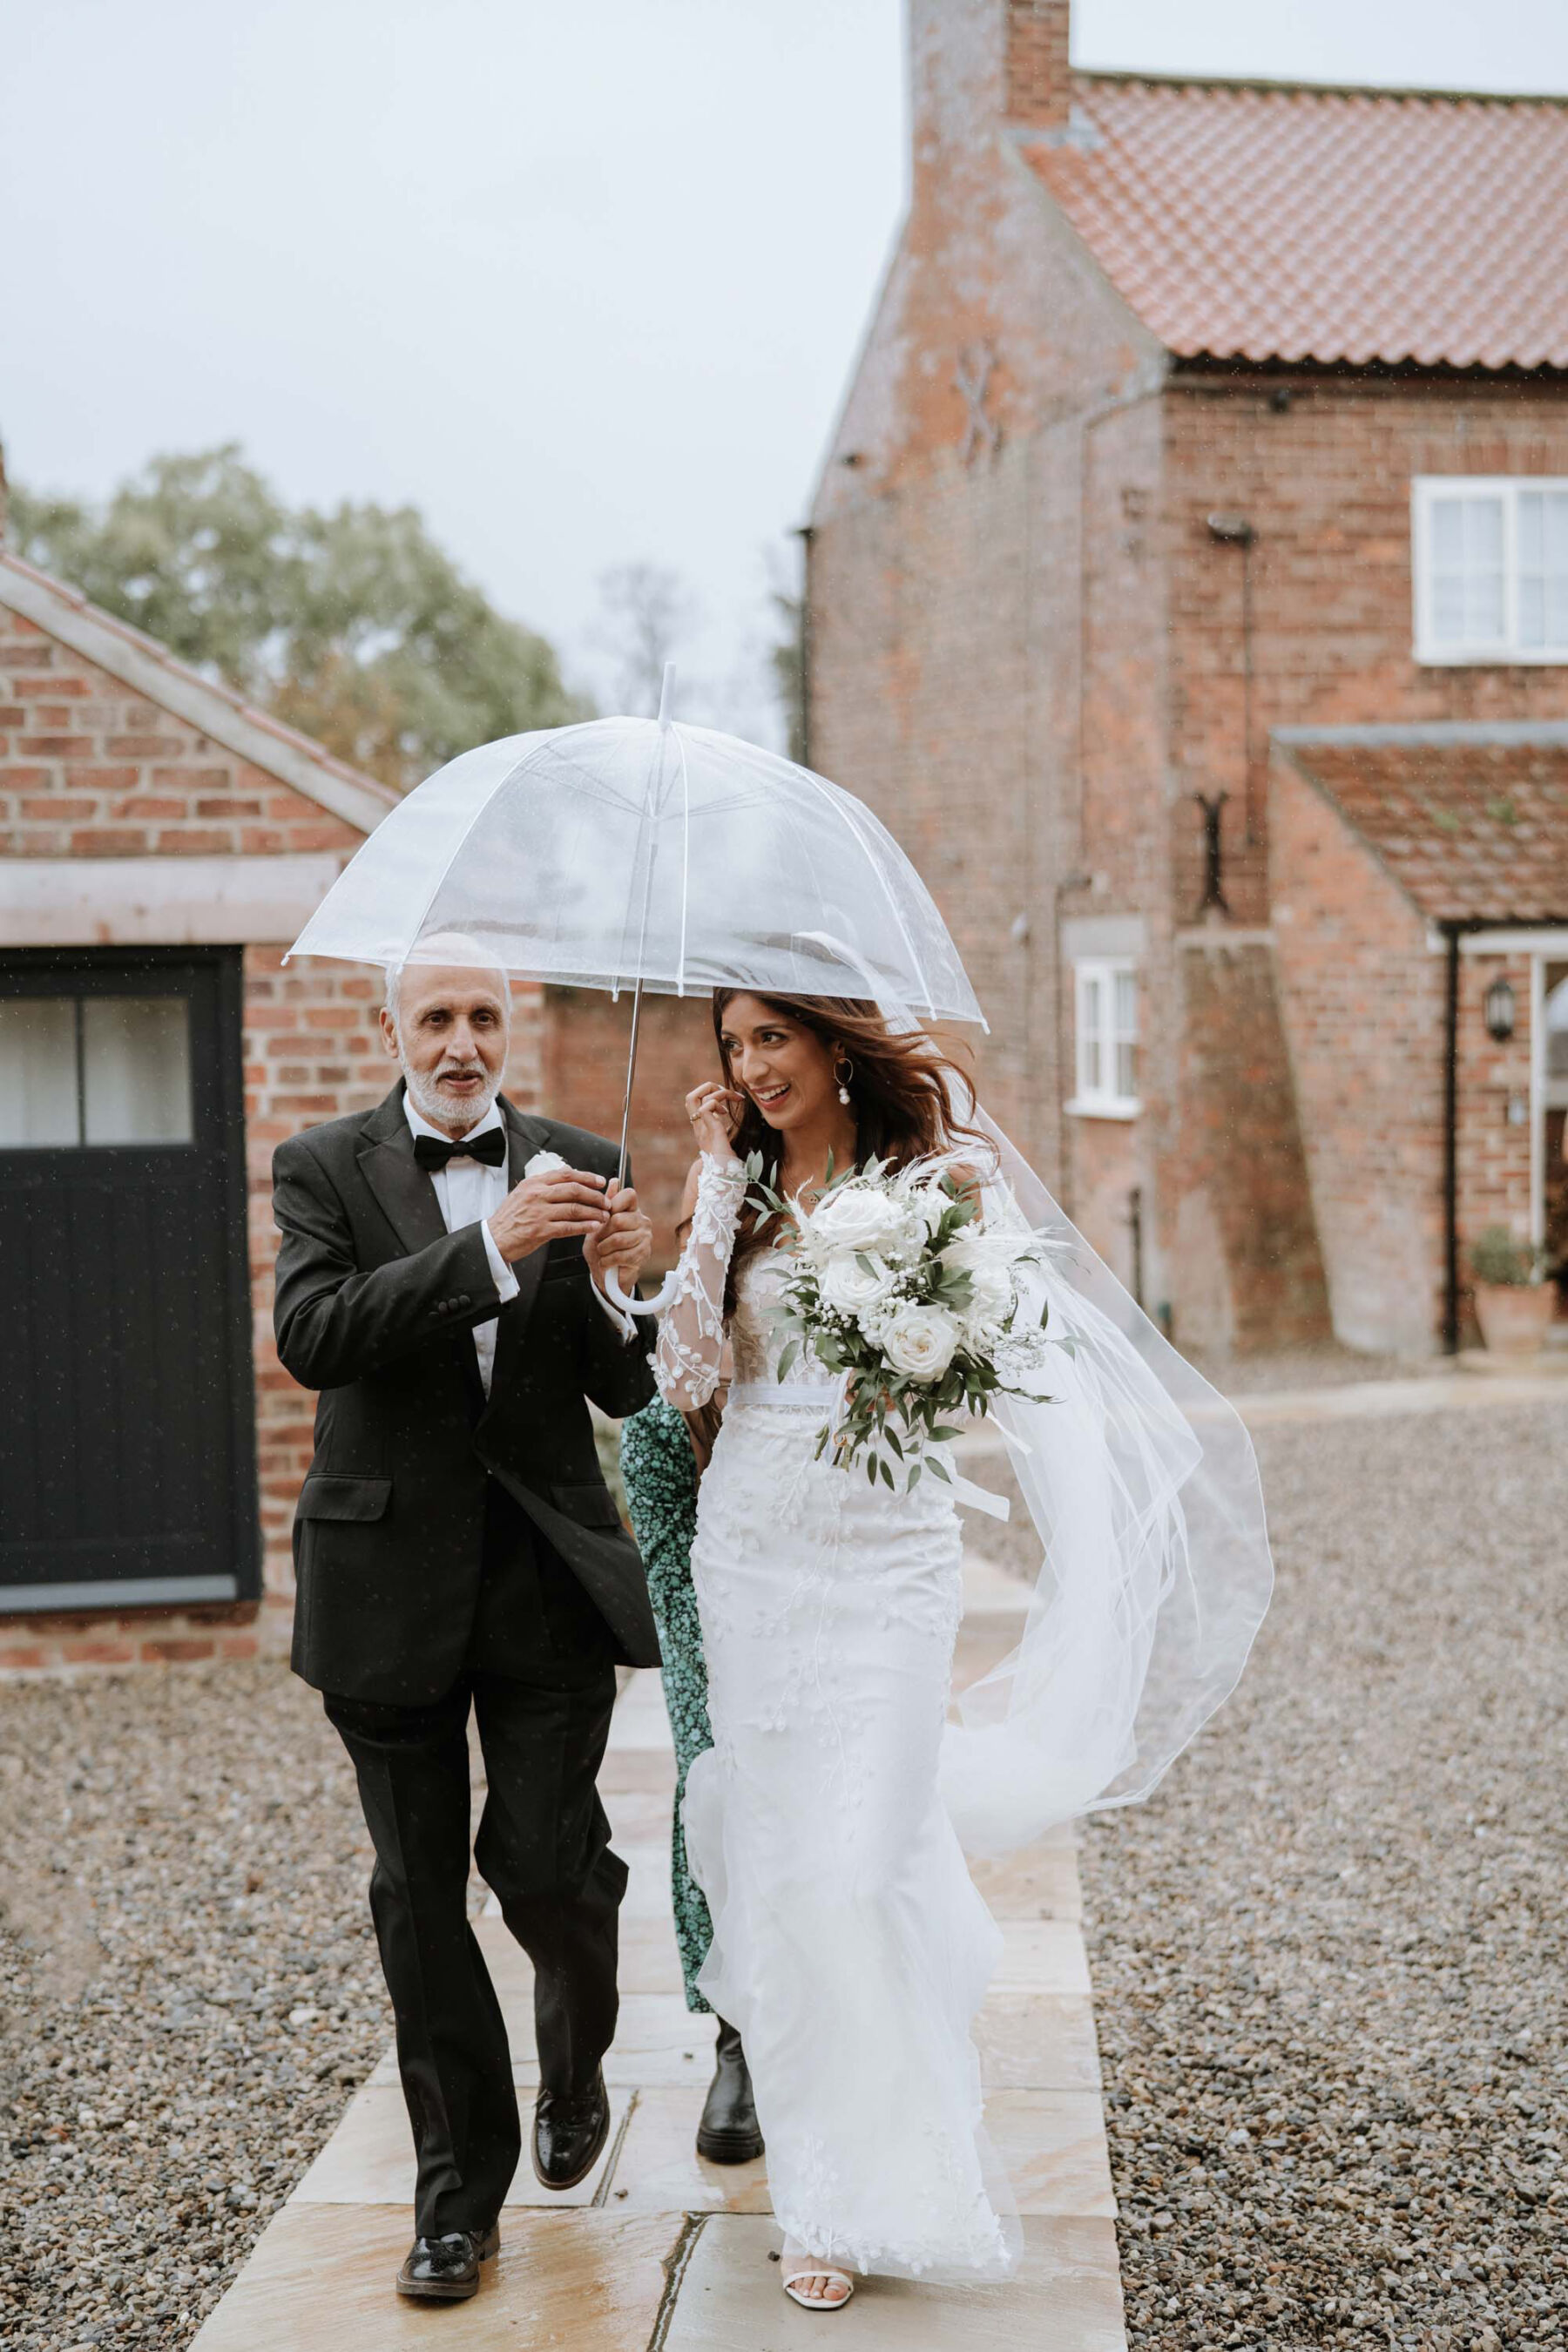 Bride arriving with the father of the bride in black tie and holding an umbrella.